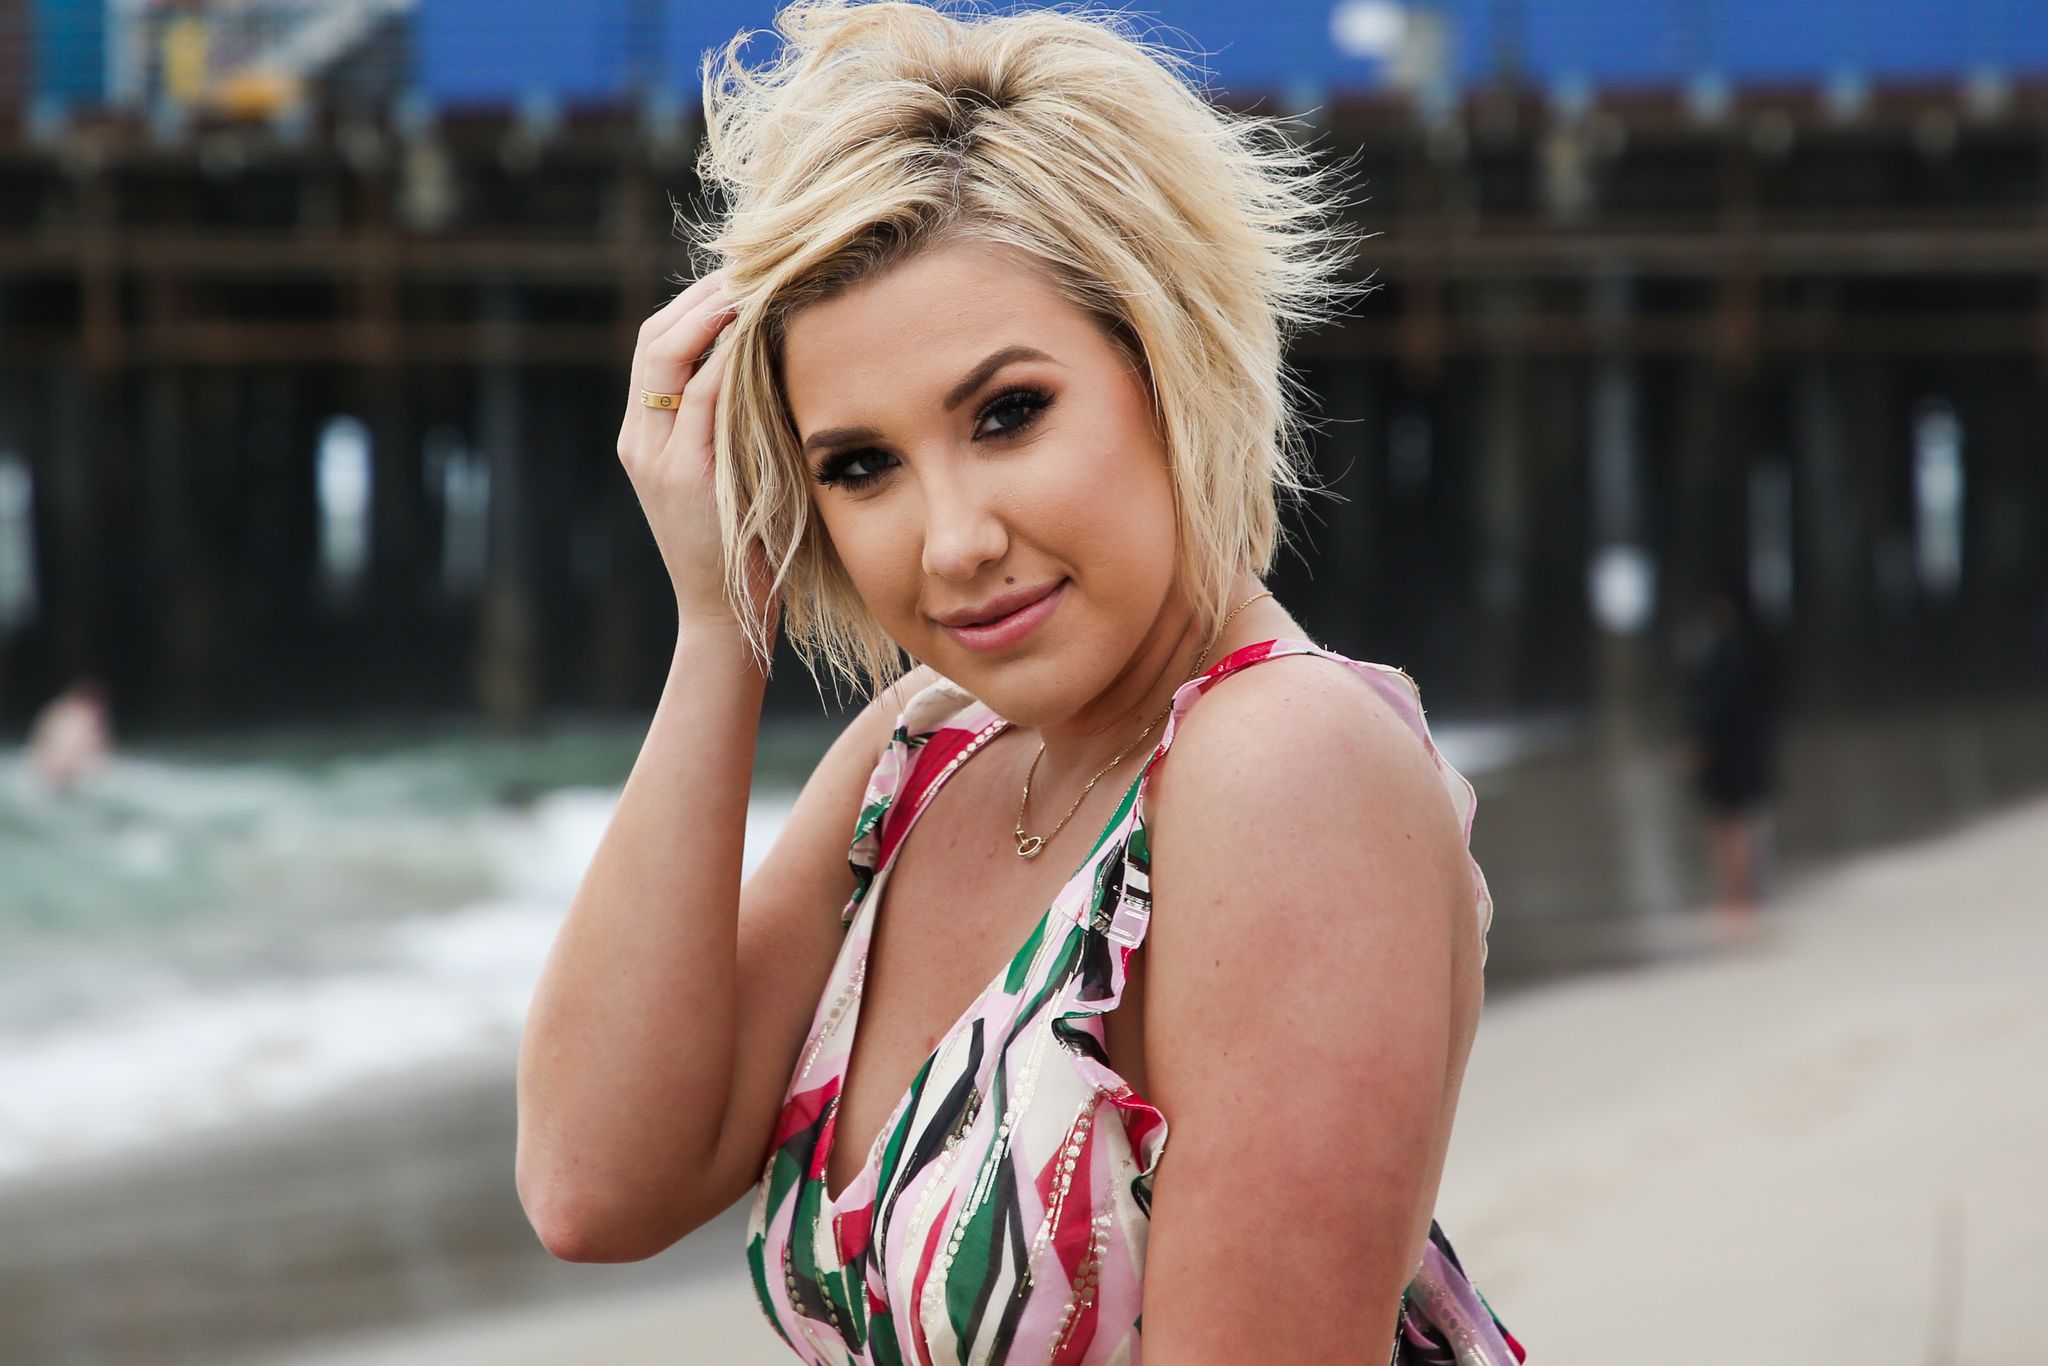 Savannah Chrisley celebrate her Engagement with Nic Kerdiles on March 27, 2019 | Photo: Getty Images